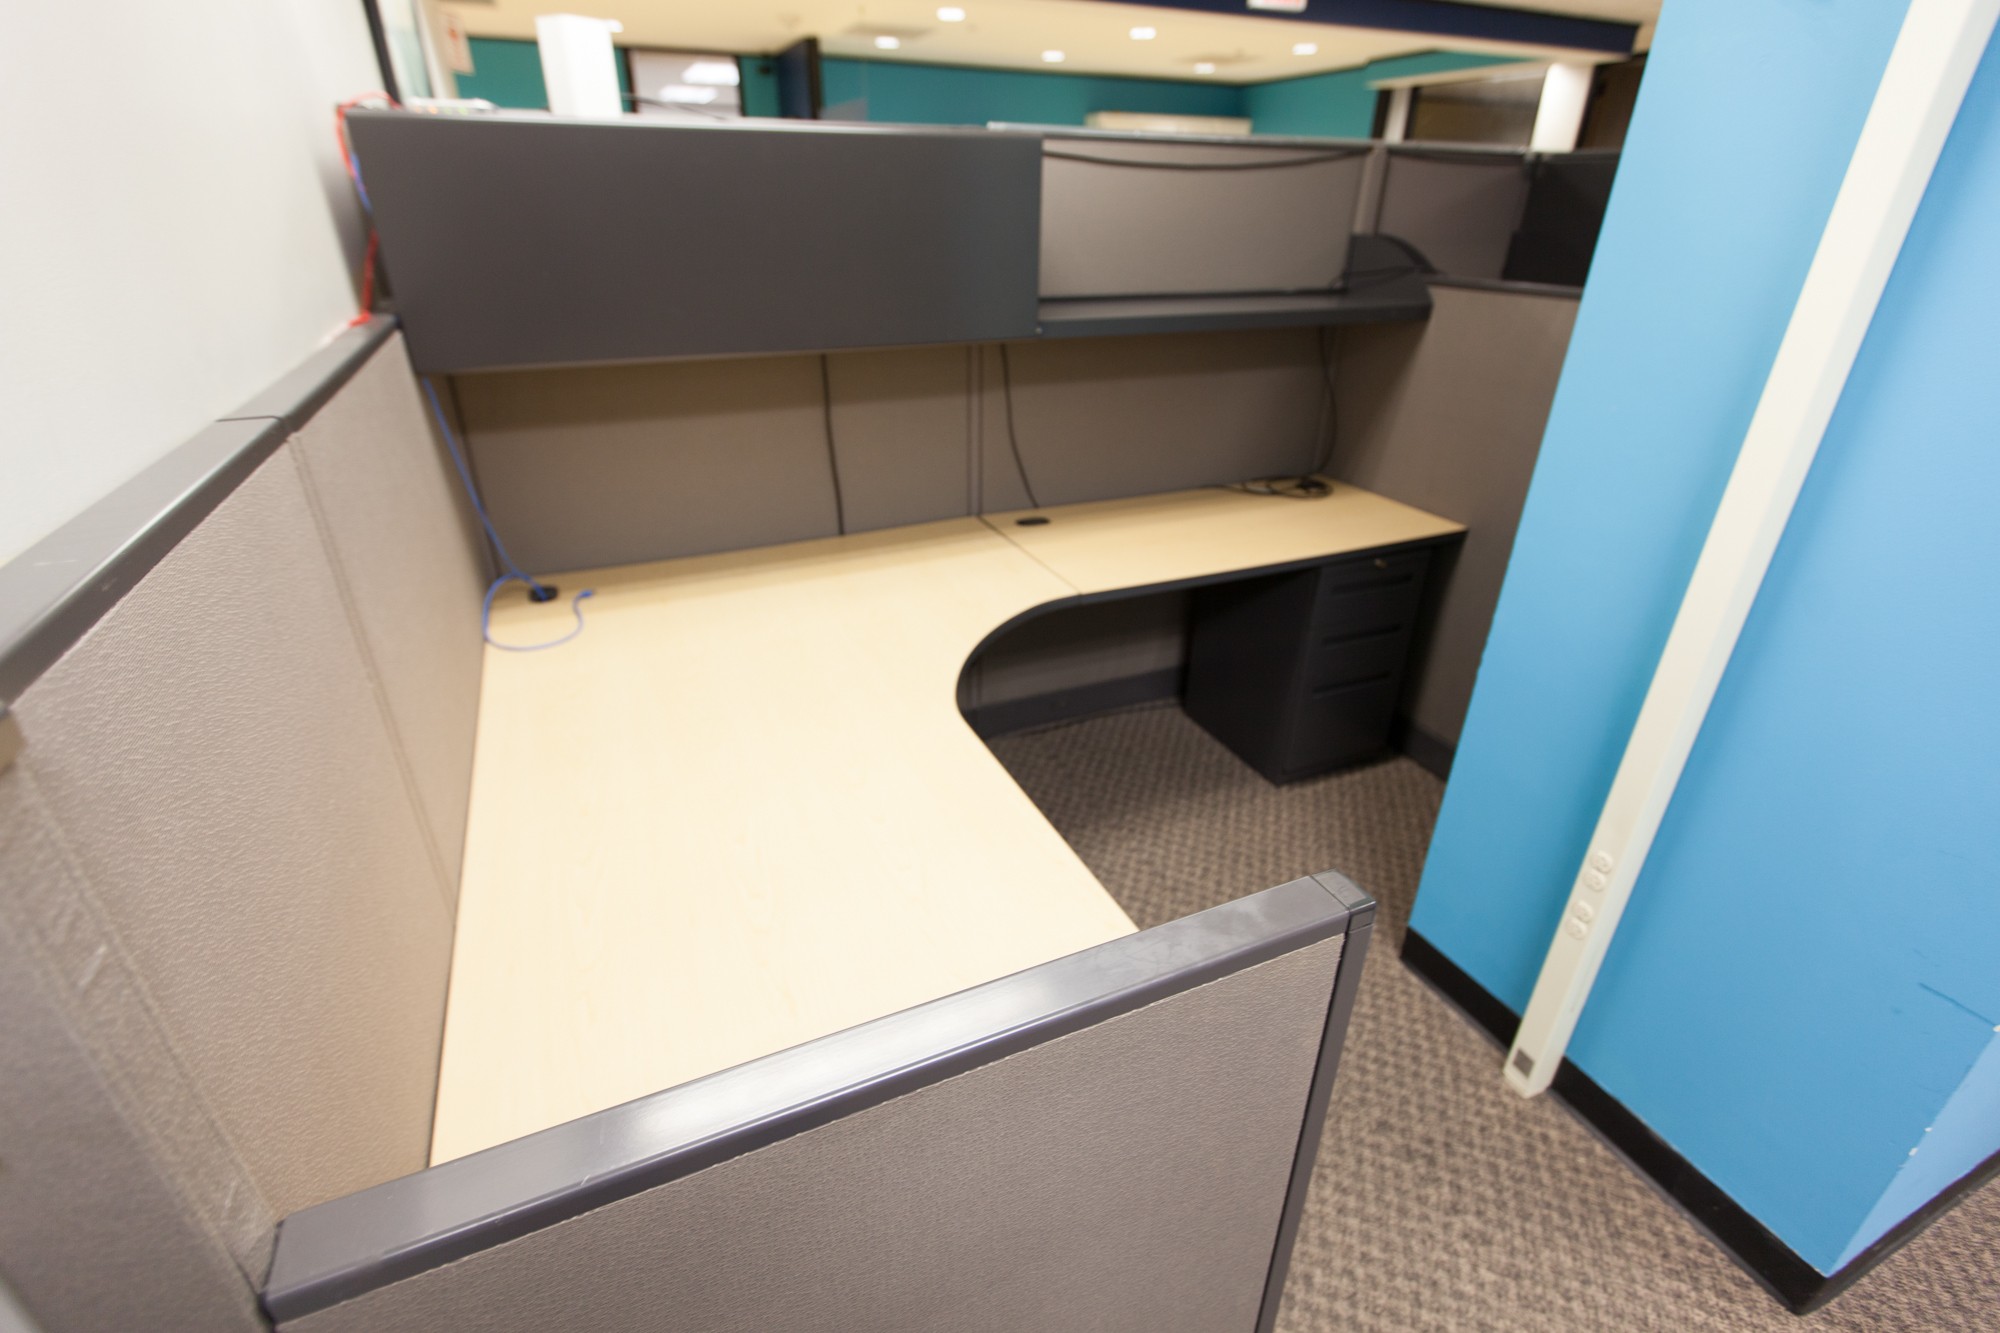 Steelcase Cubicles for Offices-1213